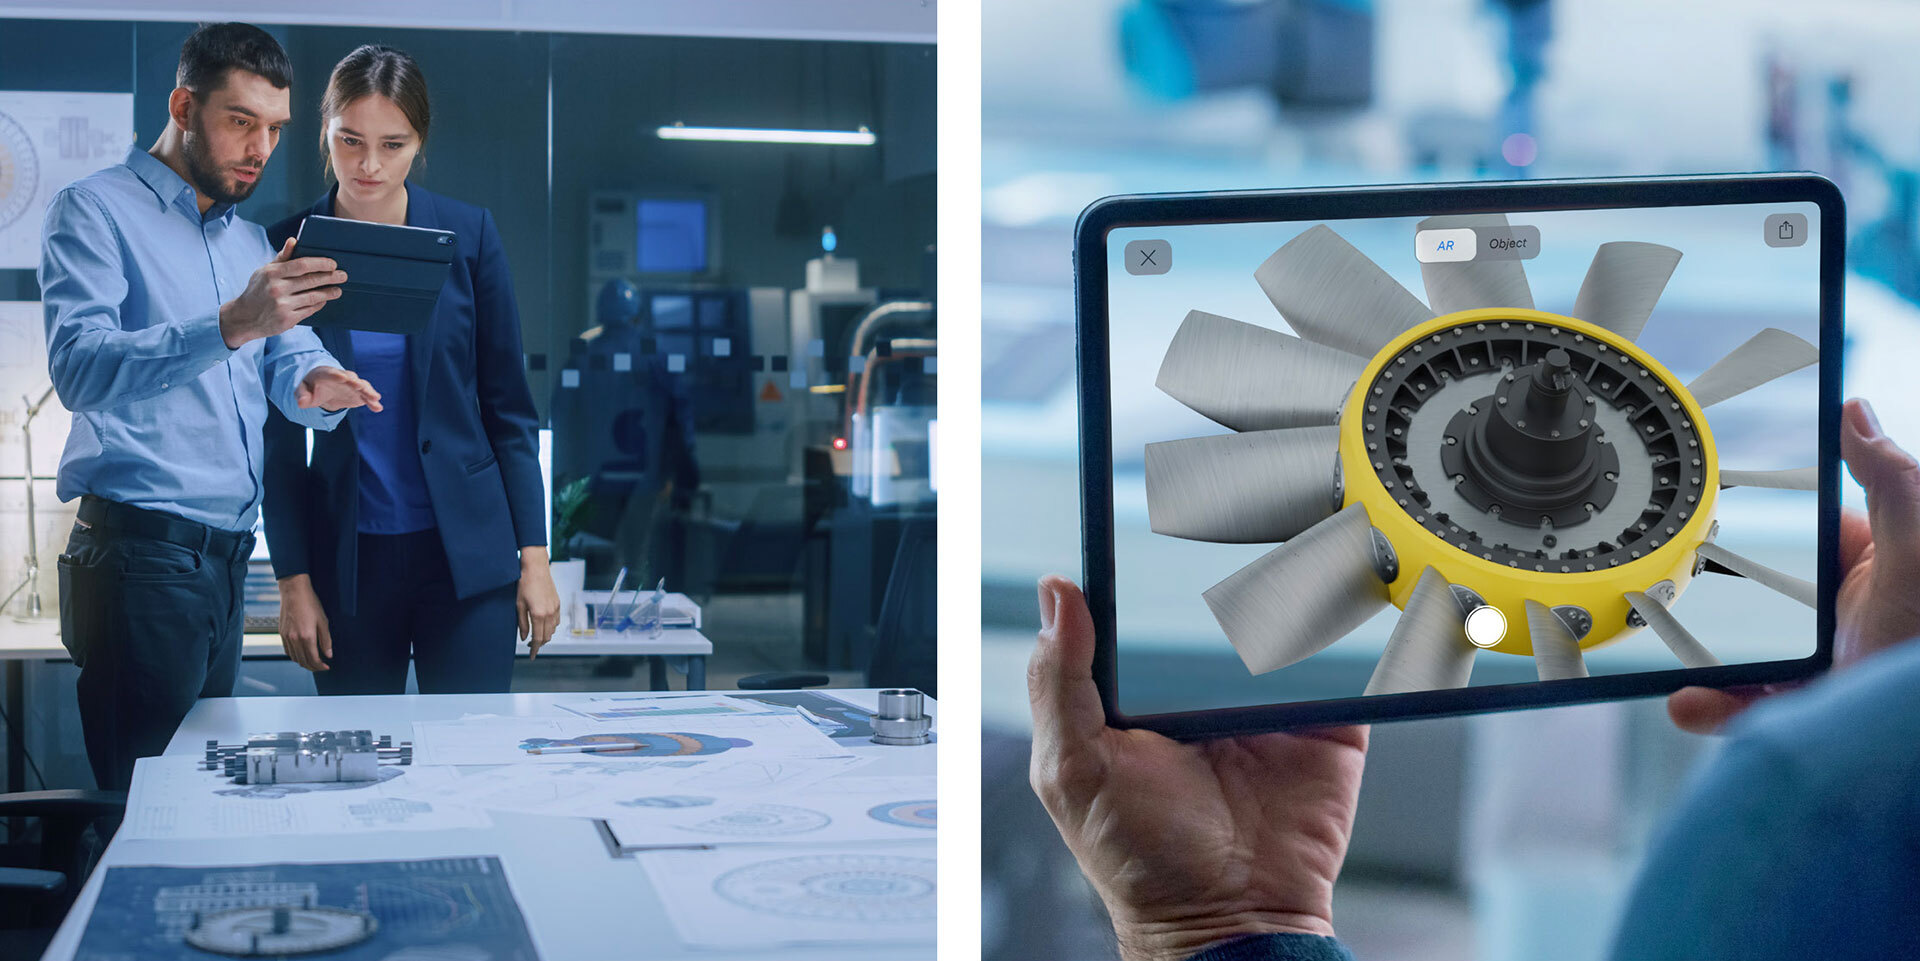 Two product developers exploring their new turbine product in 3D and Augmented Reality.